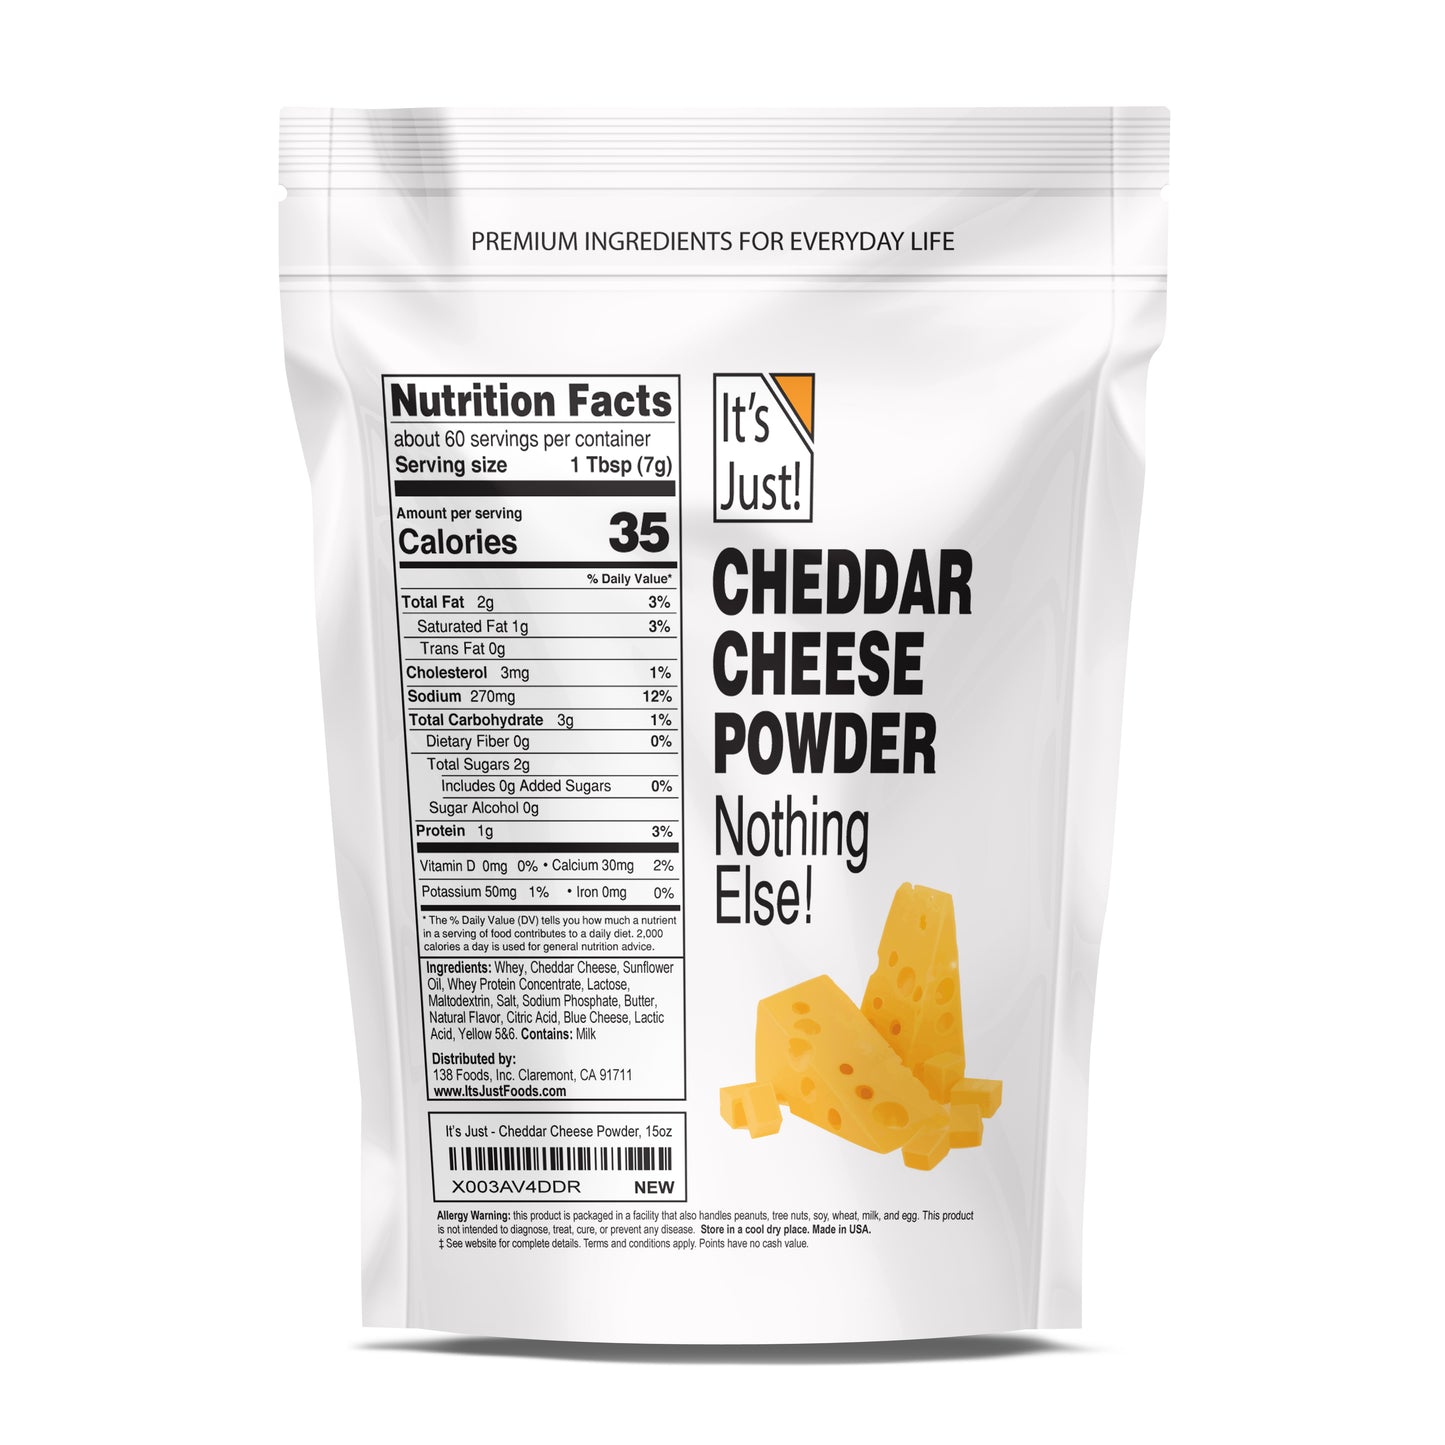 It's Just! - Yellow Cheddar Cheese Powder